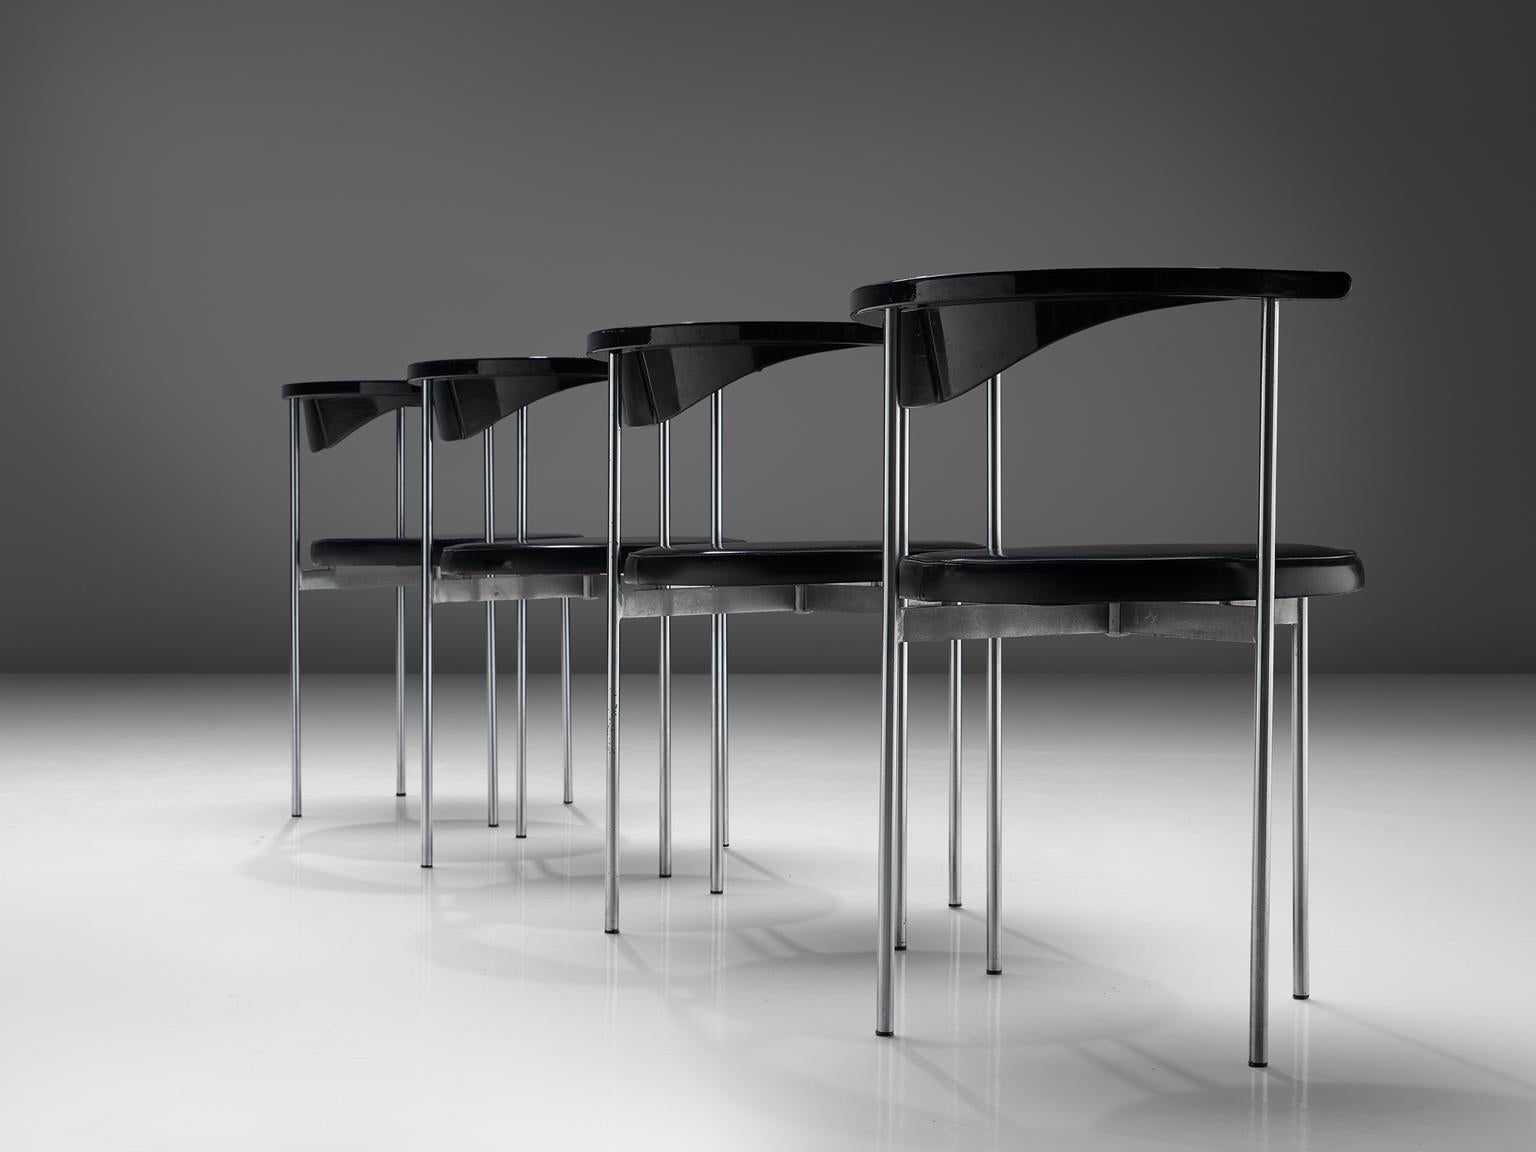 Frederik Sieck for Fritz Hansen, twelve 3200 chairs, black skai, black and white painted wood, metal, Denmark, design 1962, execution 1967.

This industrial clear set of the model 3200 chairs was designed by the Swedish designer Sieck for Fritz